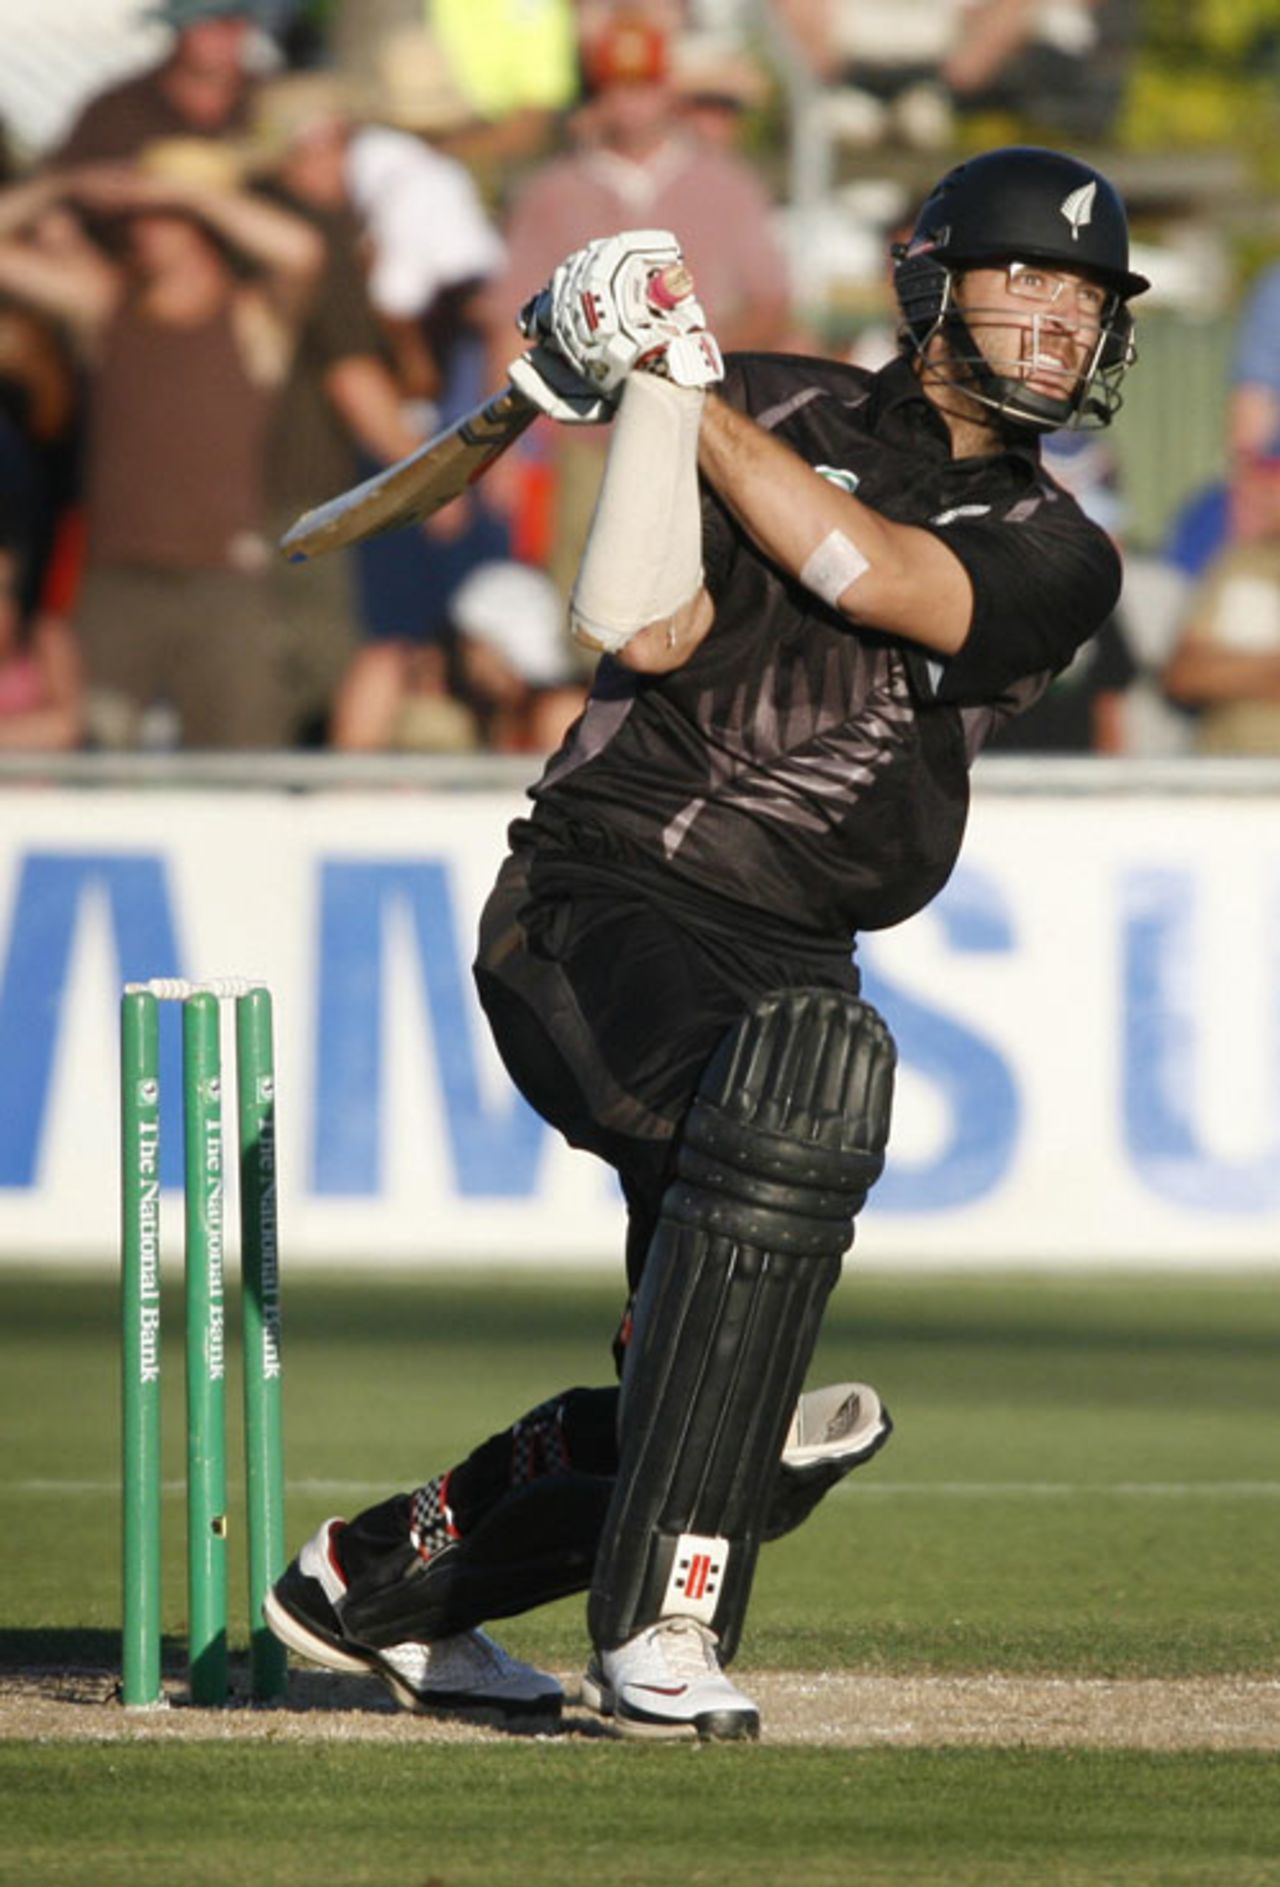 Daniel Vettori on the front foot, forcing down the ground, New Zealand v England, 4th ODI, Napier, February 20, 2008